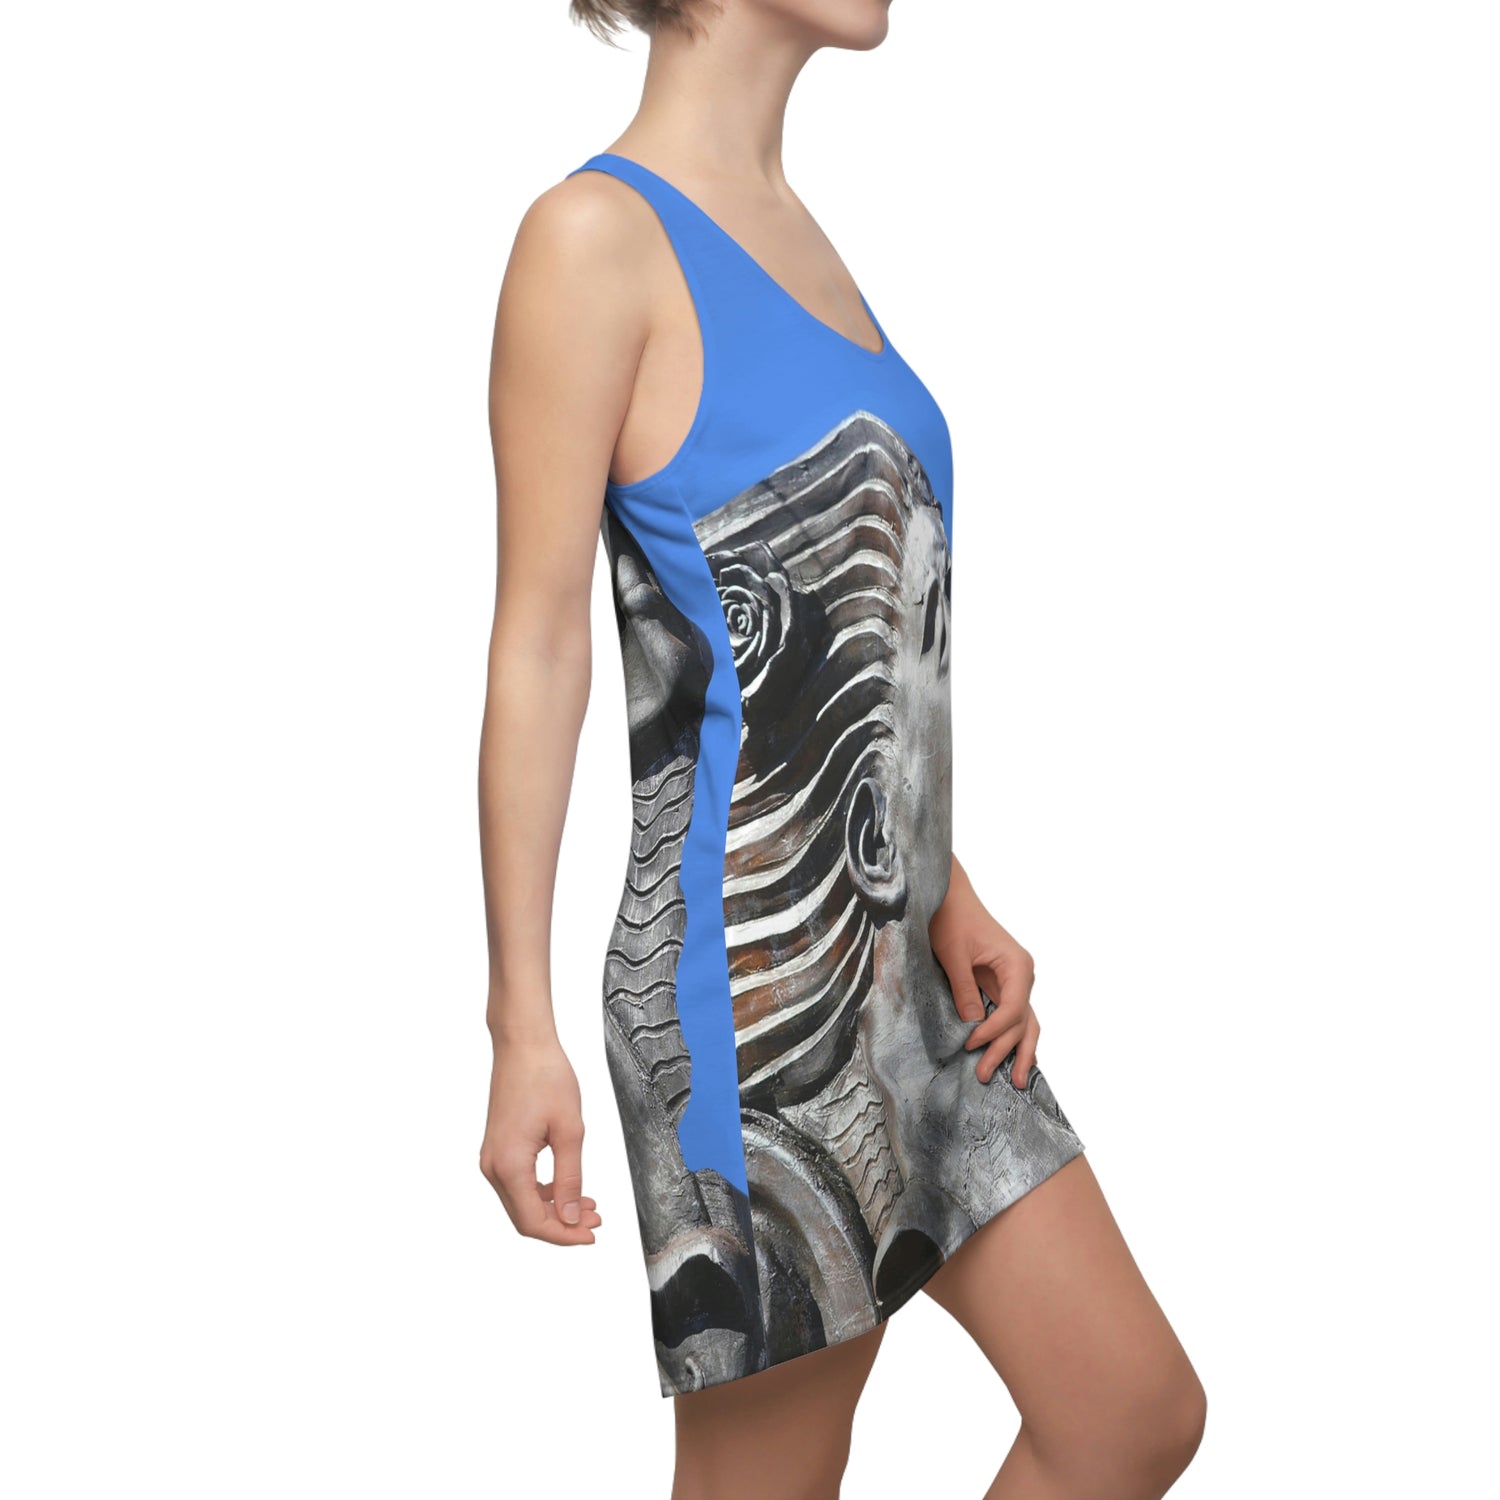 Nymph Beauty - Women's All-Over Print Racerback Dress - Fry1Productions